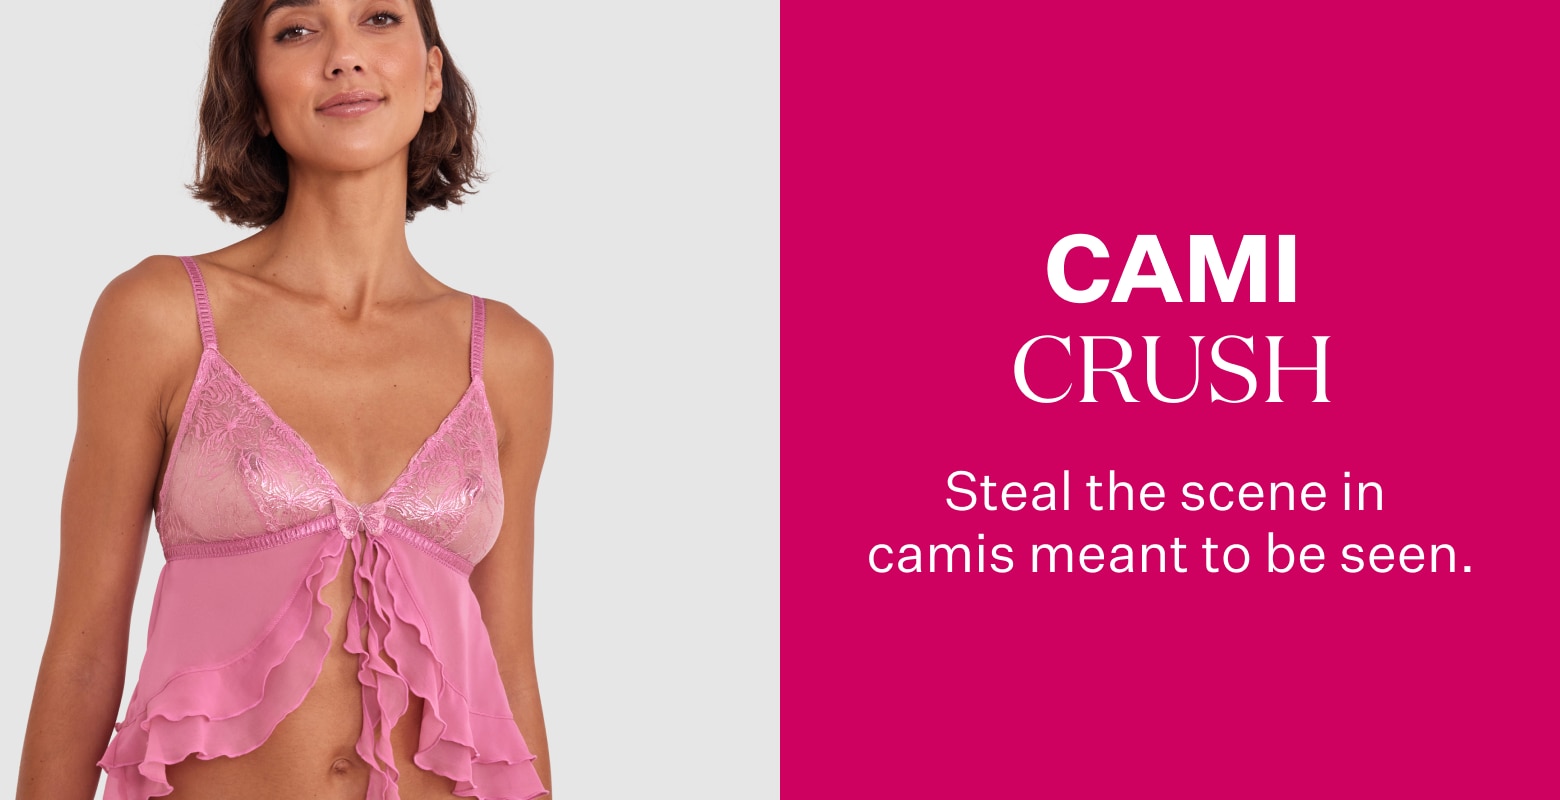 Cami Crush. Steal the scene in camis meant to be seen.